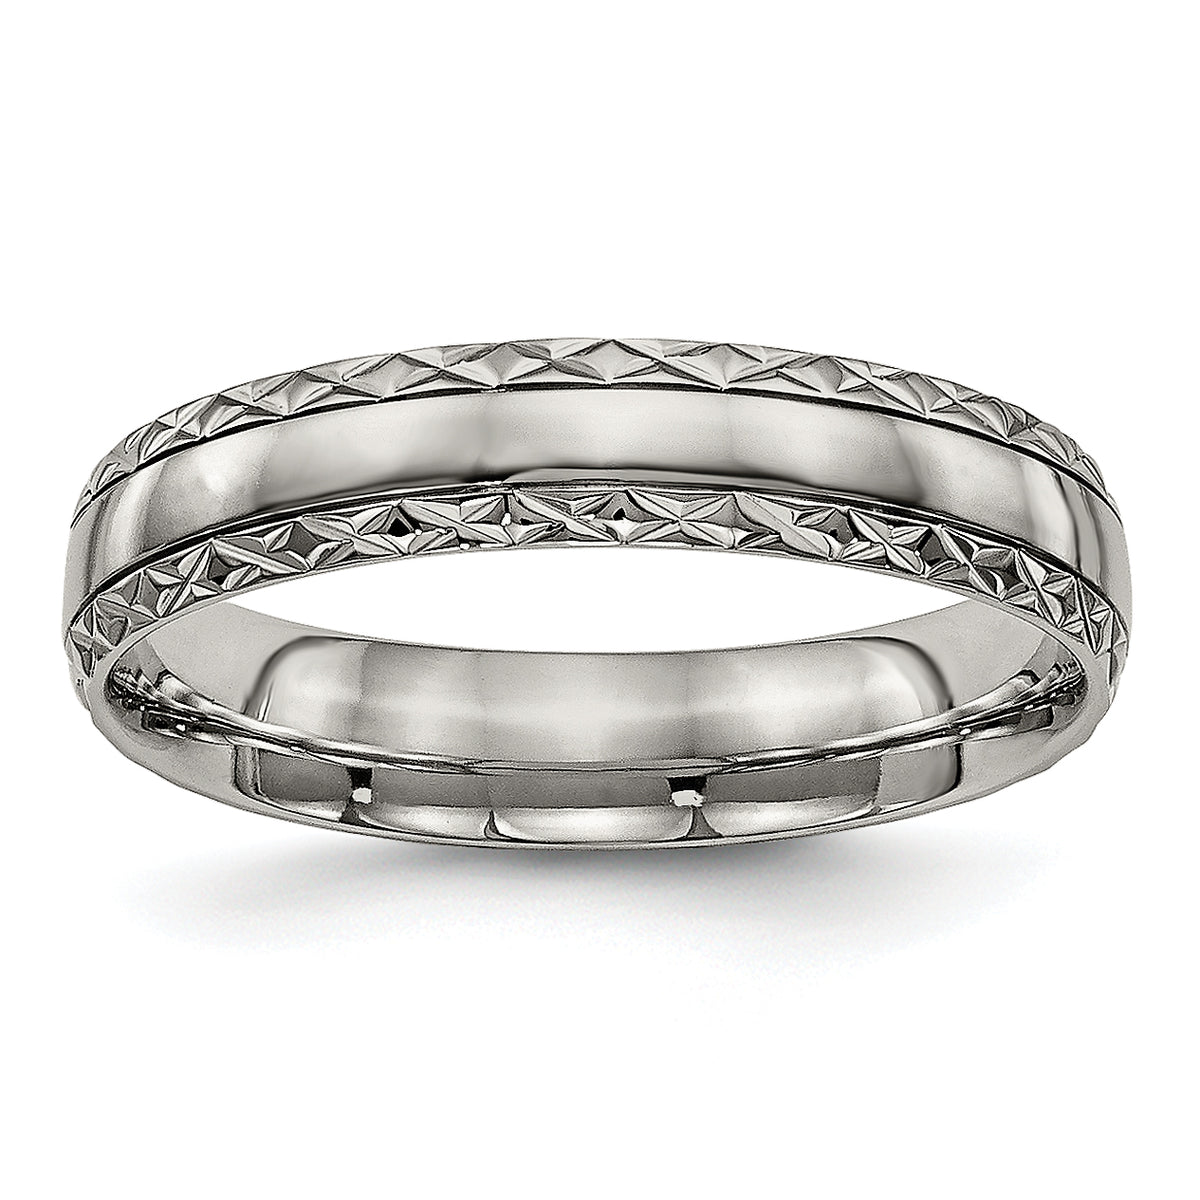 Titanium Polished Grooved 5mm Criss Cross Design Band